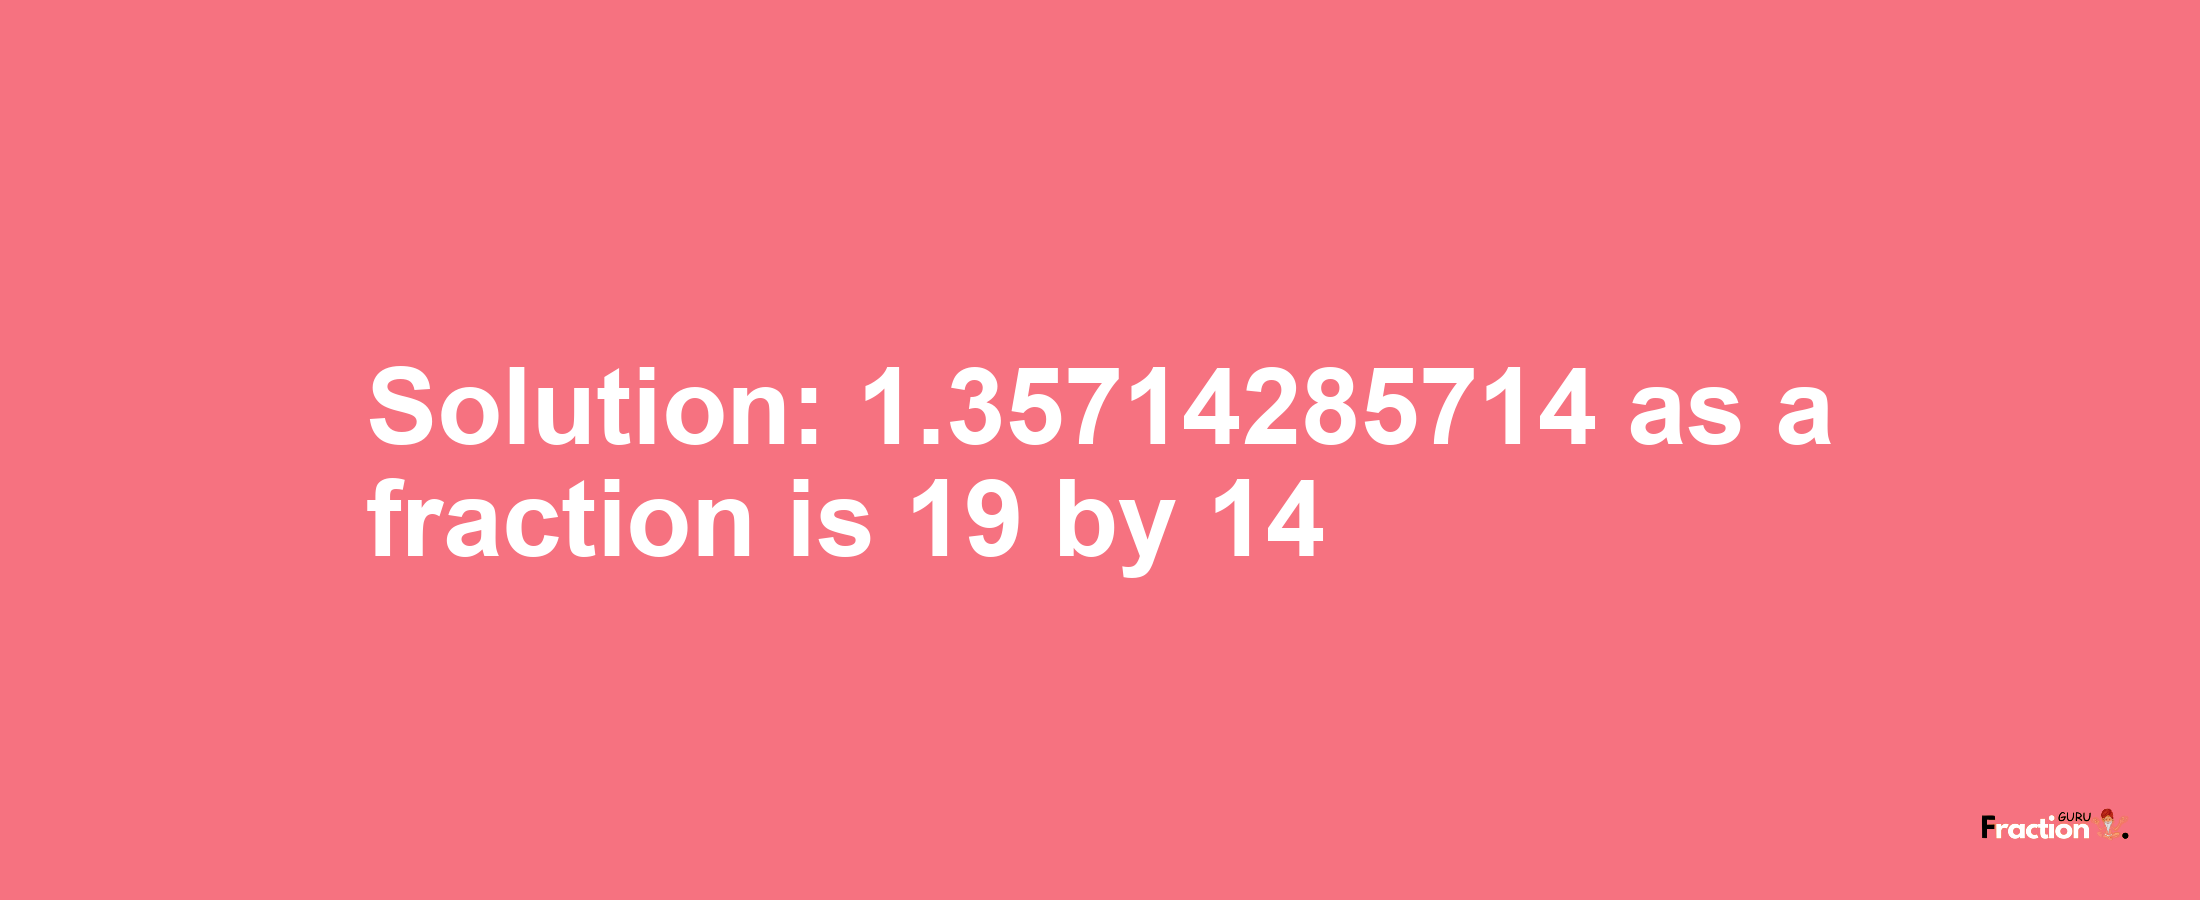 Solution:1.35714285714 as a fraction is 19/14